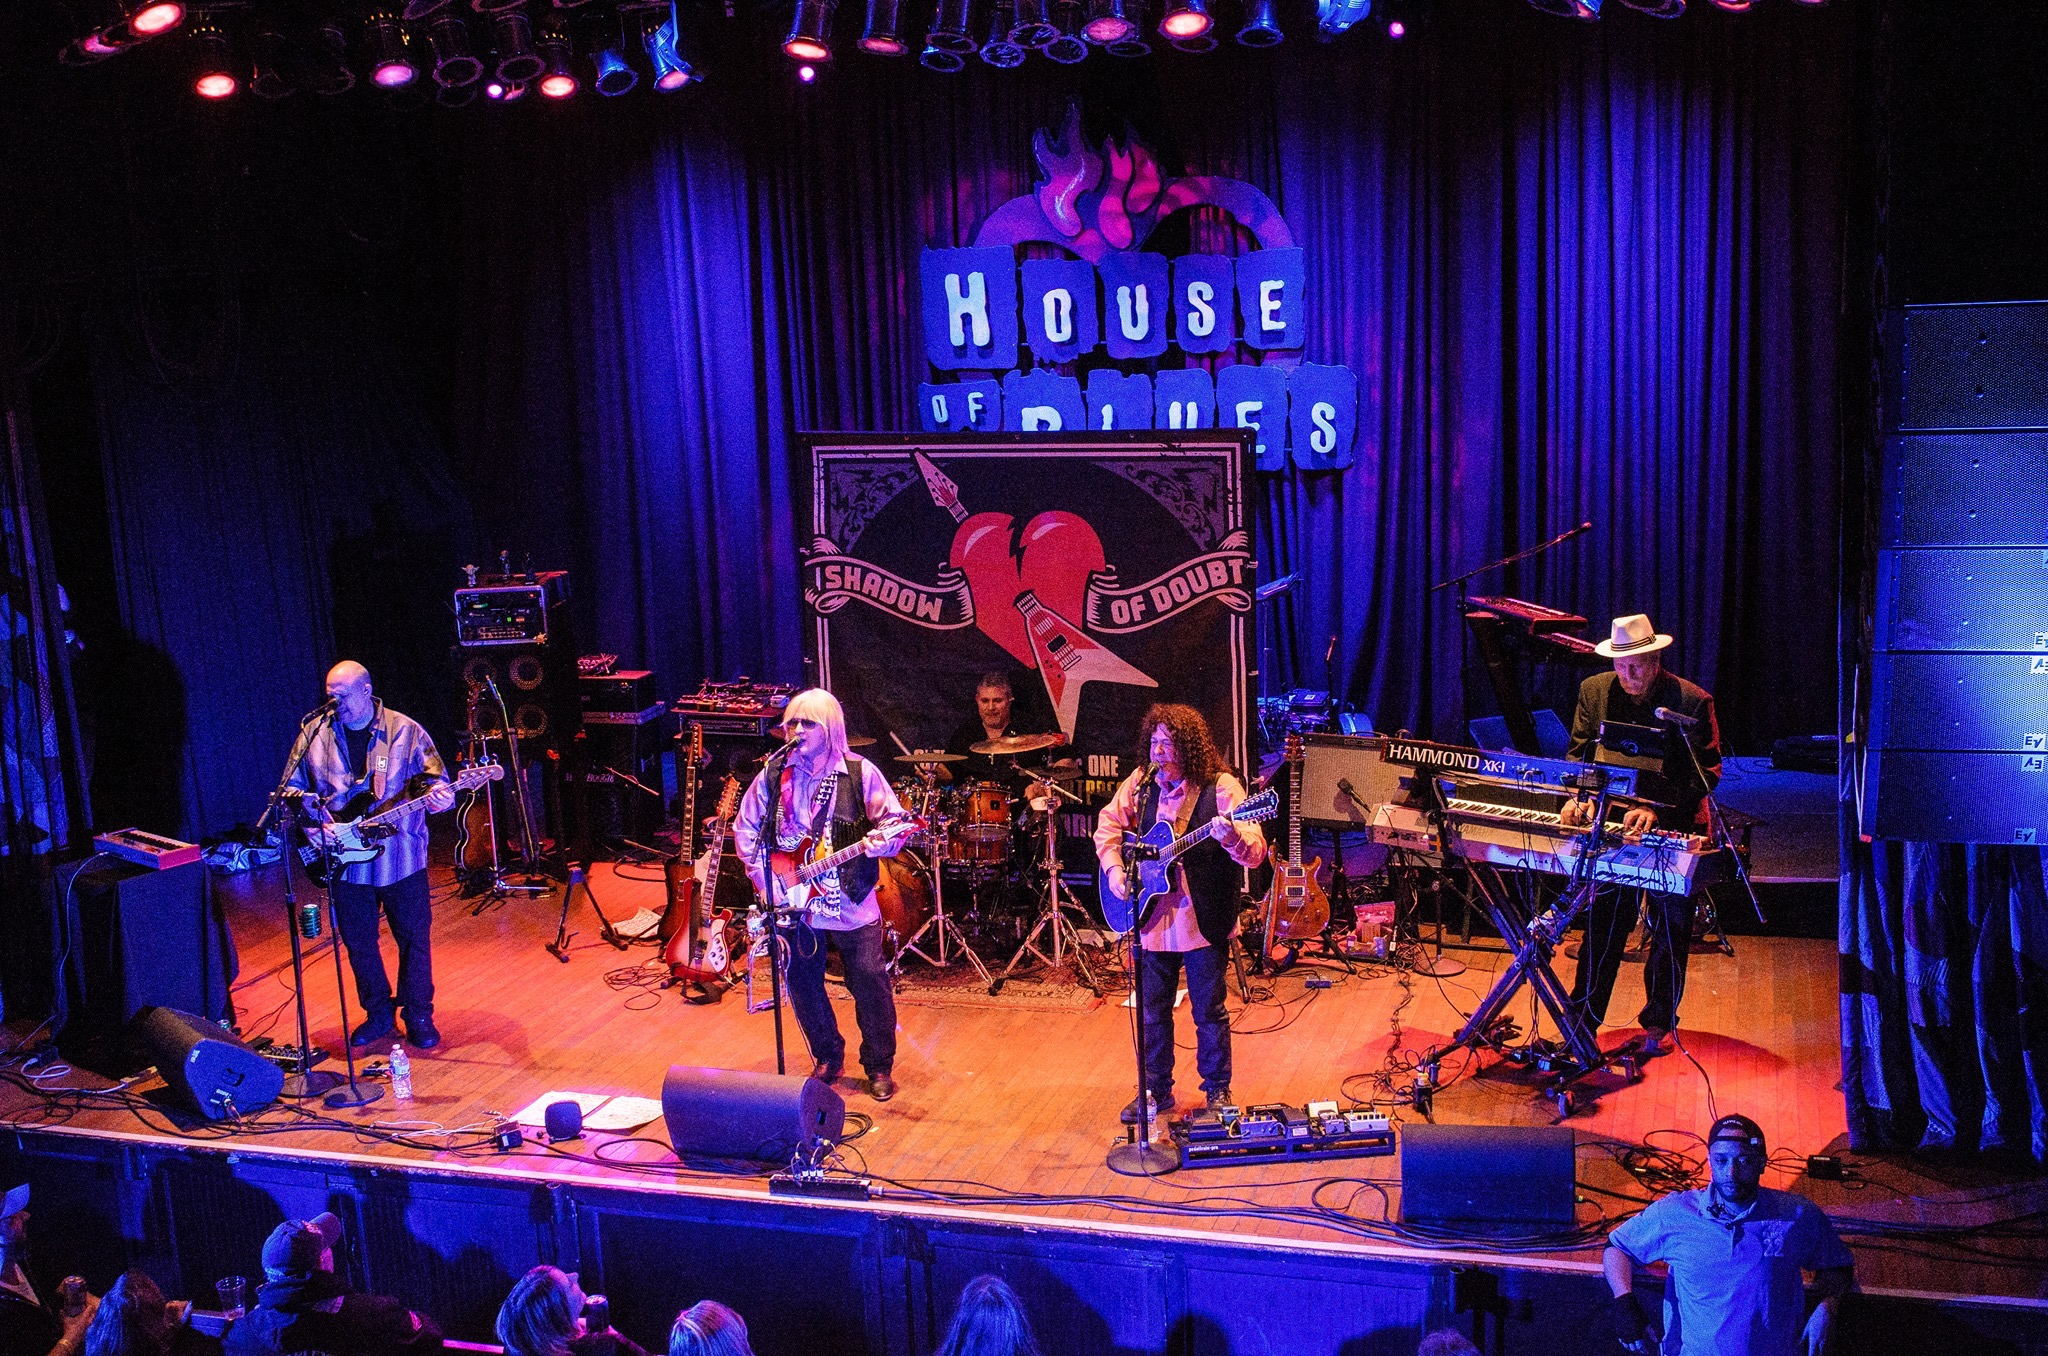 shadow of doubt - a tribute to tom petty, house of blues cleveland, july 5